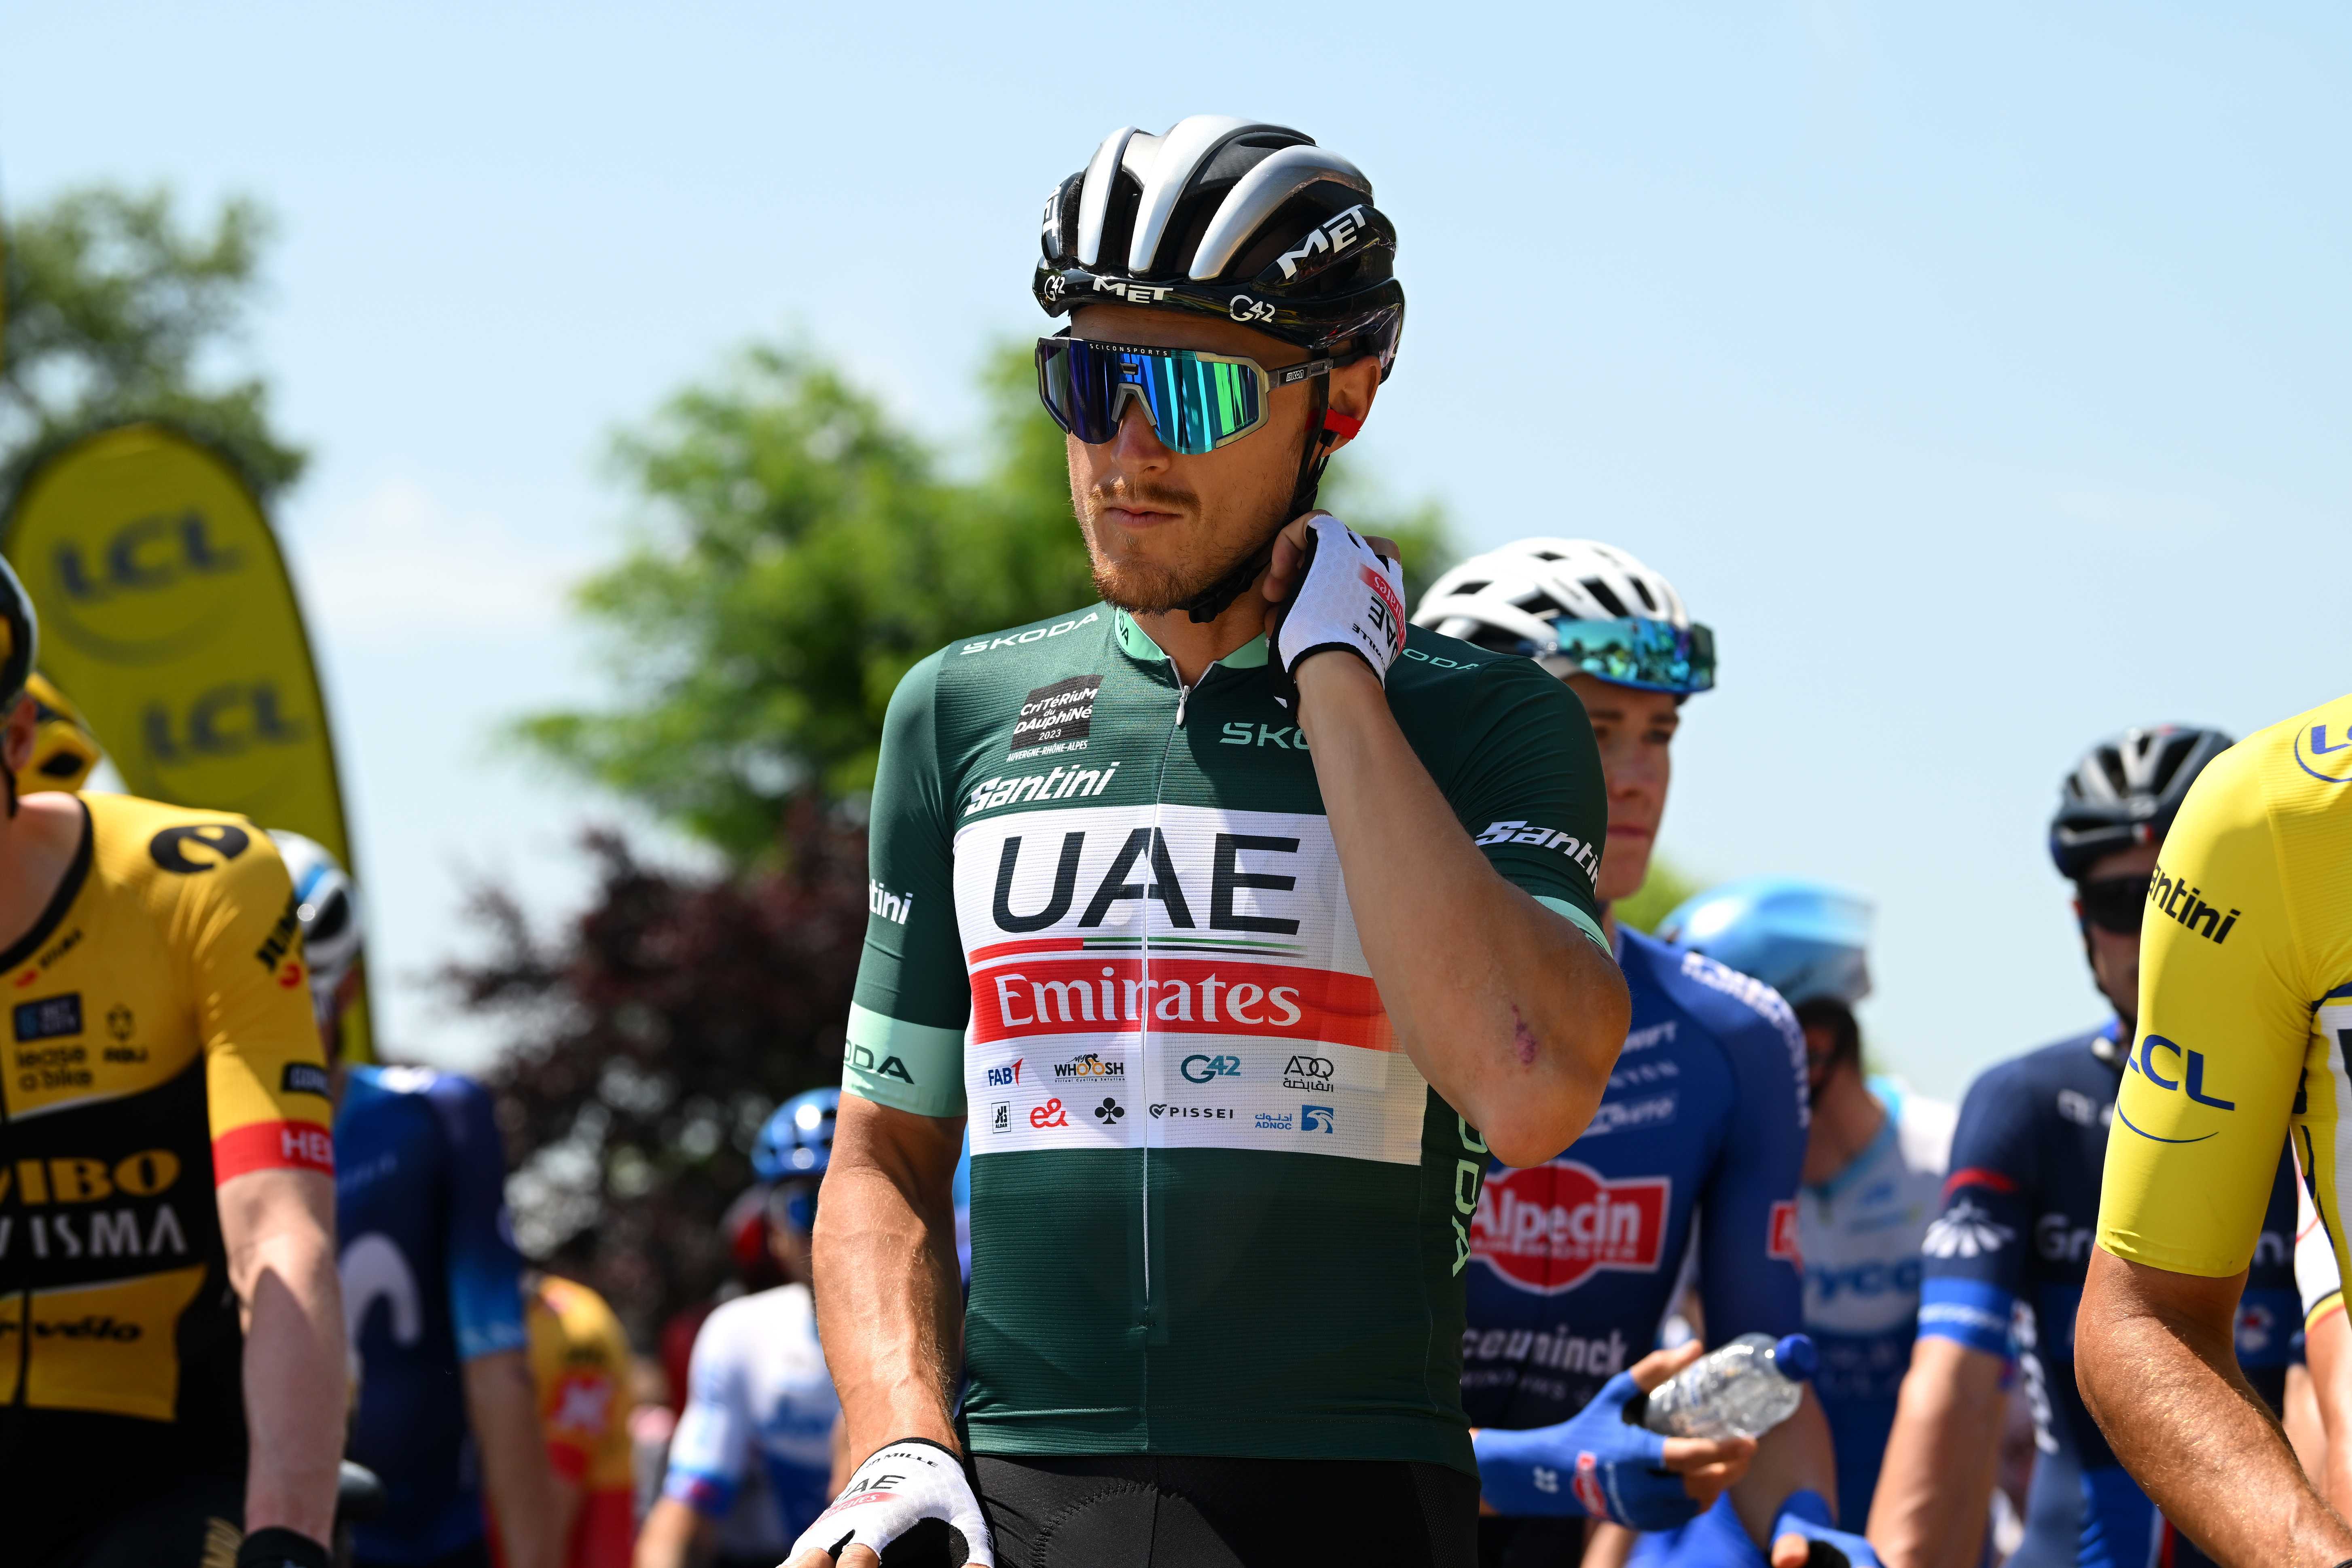 kit jurist pence Tour de France green jersey will be in a new shade | Cycling Weekly